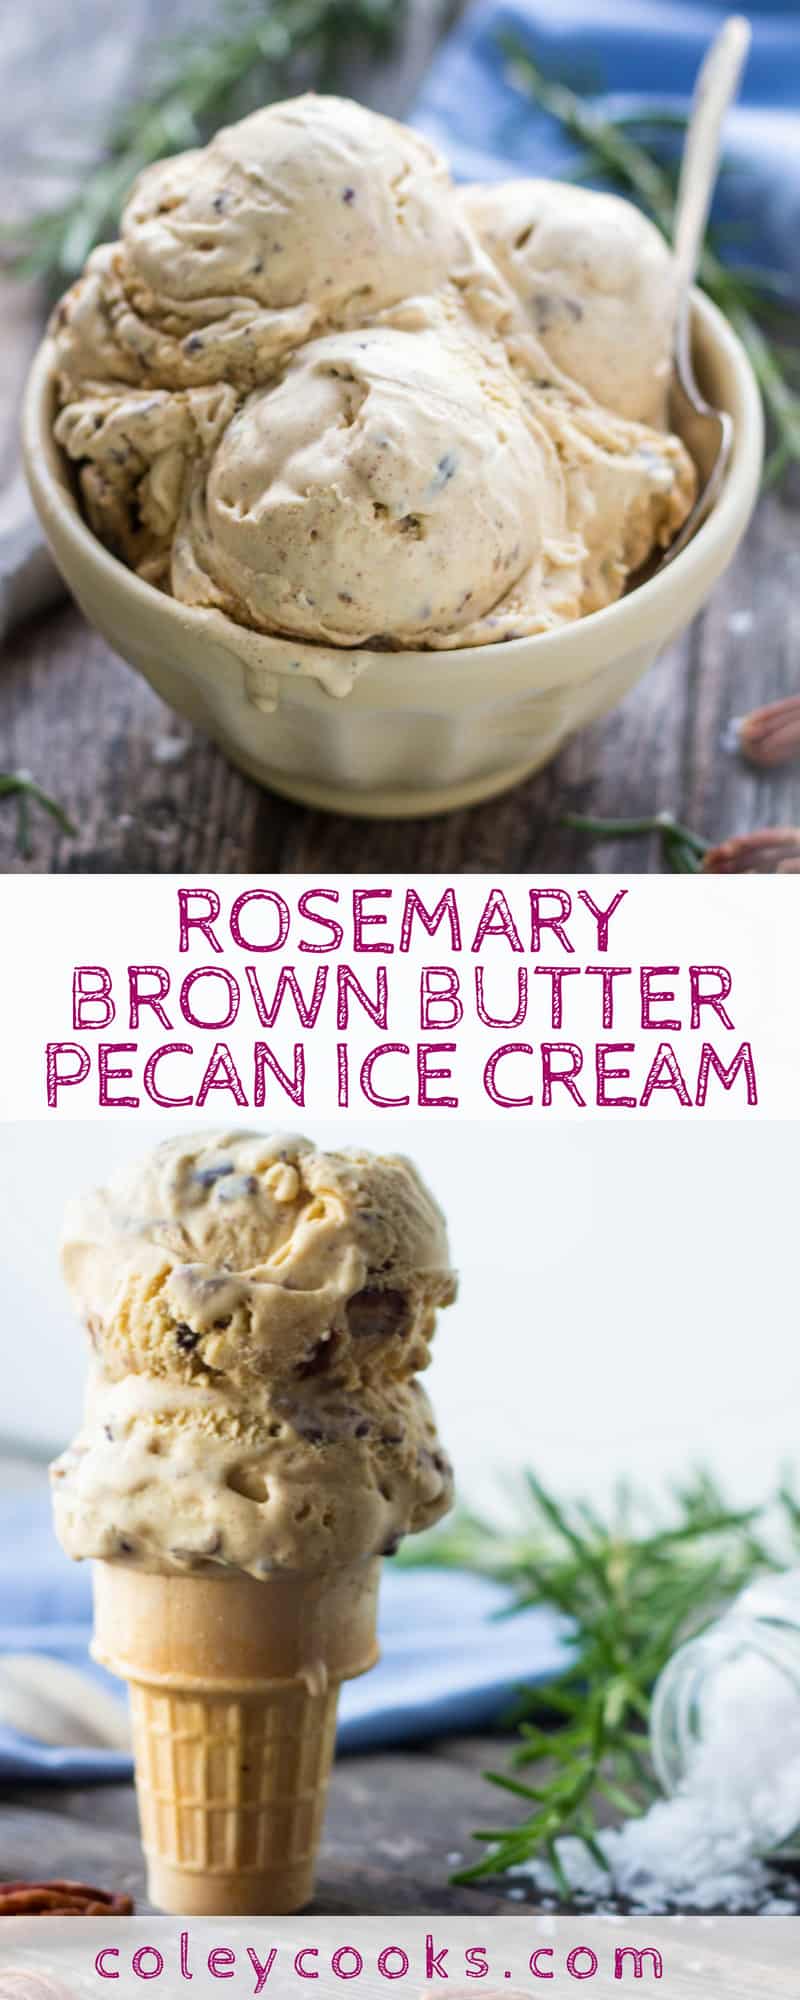 This recipe for Rosemary Brown Butter Pecan Ice Cream is an over the top play on traditional butter pecan ice cream. Rich, buttery, and loaded with salty pecans. #icecream #recipe #butterpecan #brownbutter | ColeyCooks.com